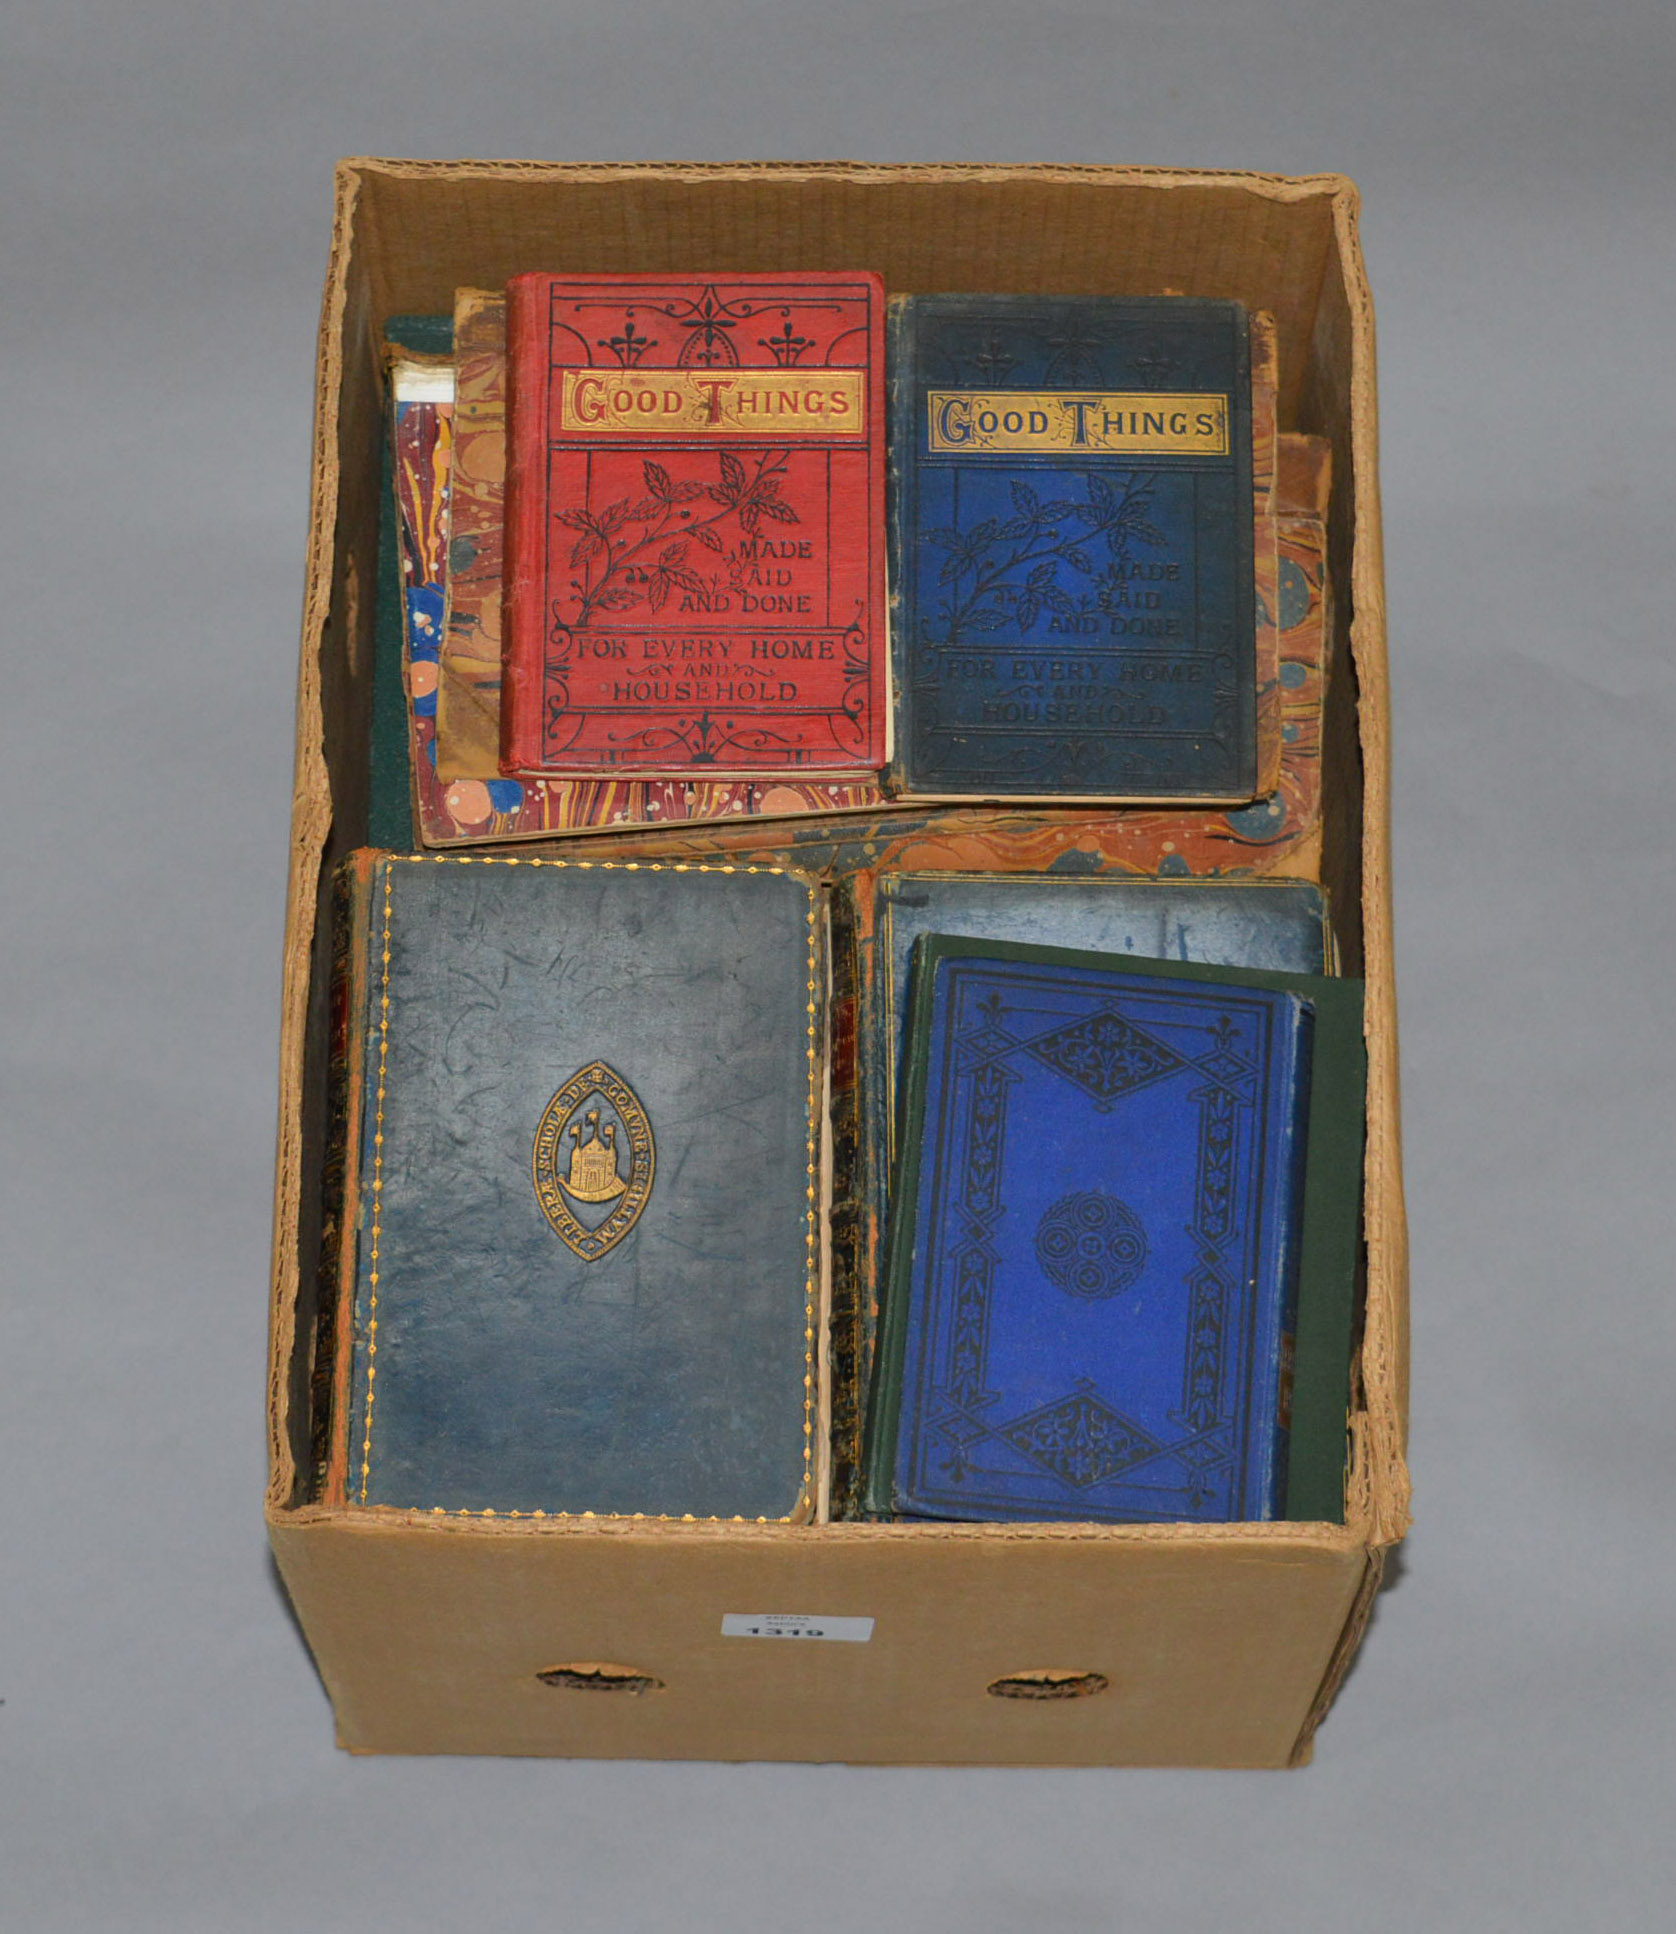 A collection of early 20th and 19th century books including non-fiction examples